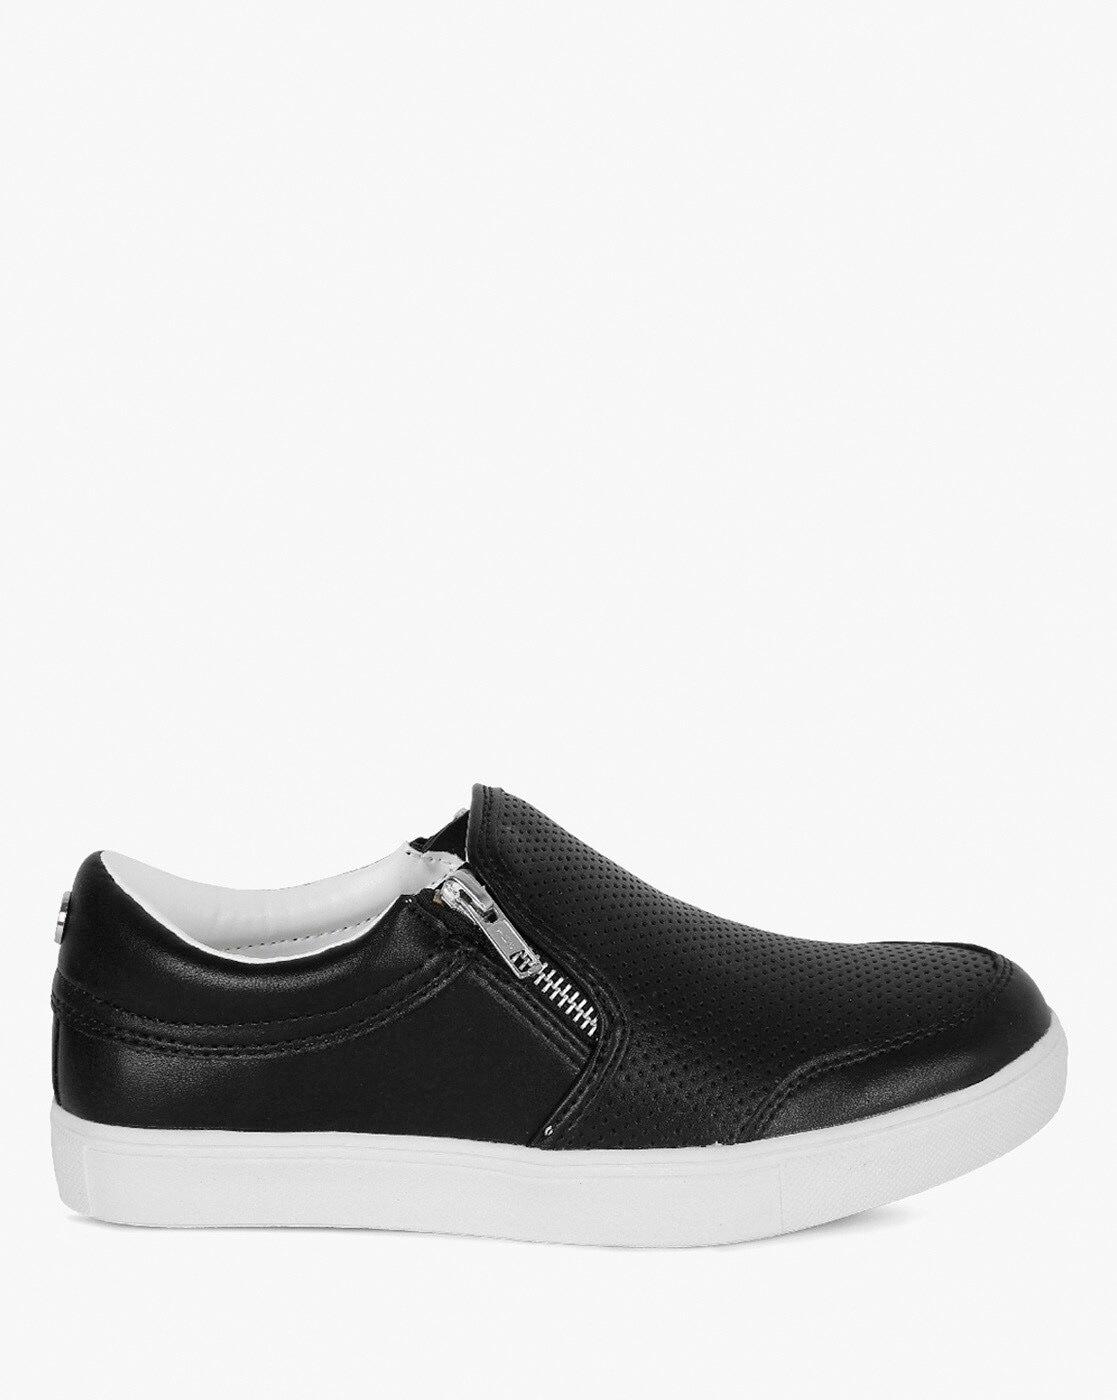 Buy Glossy Black Casual Shoes for Women 